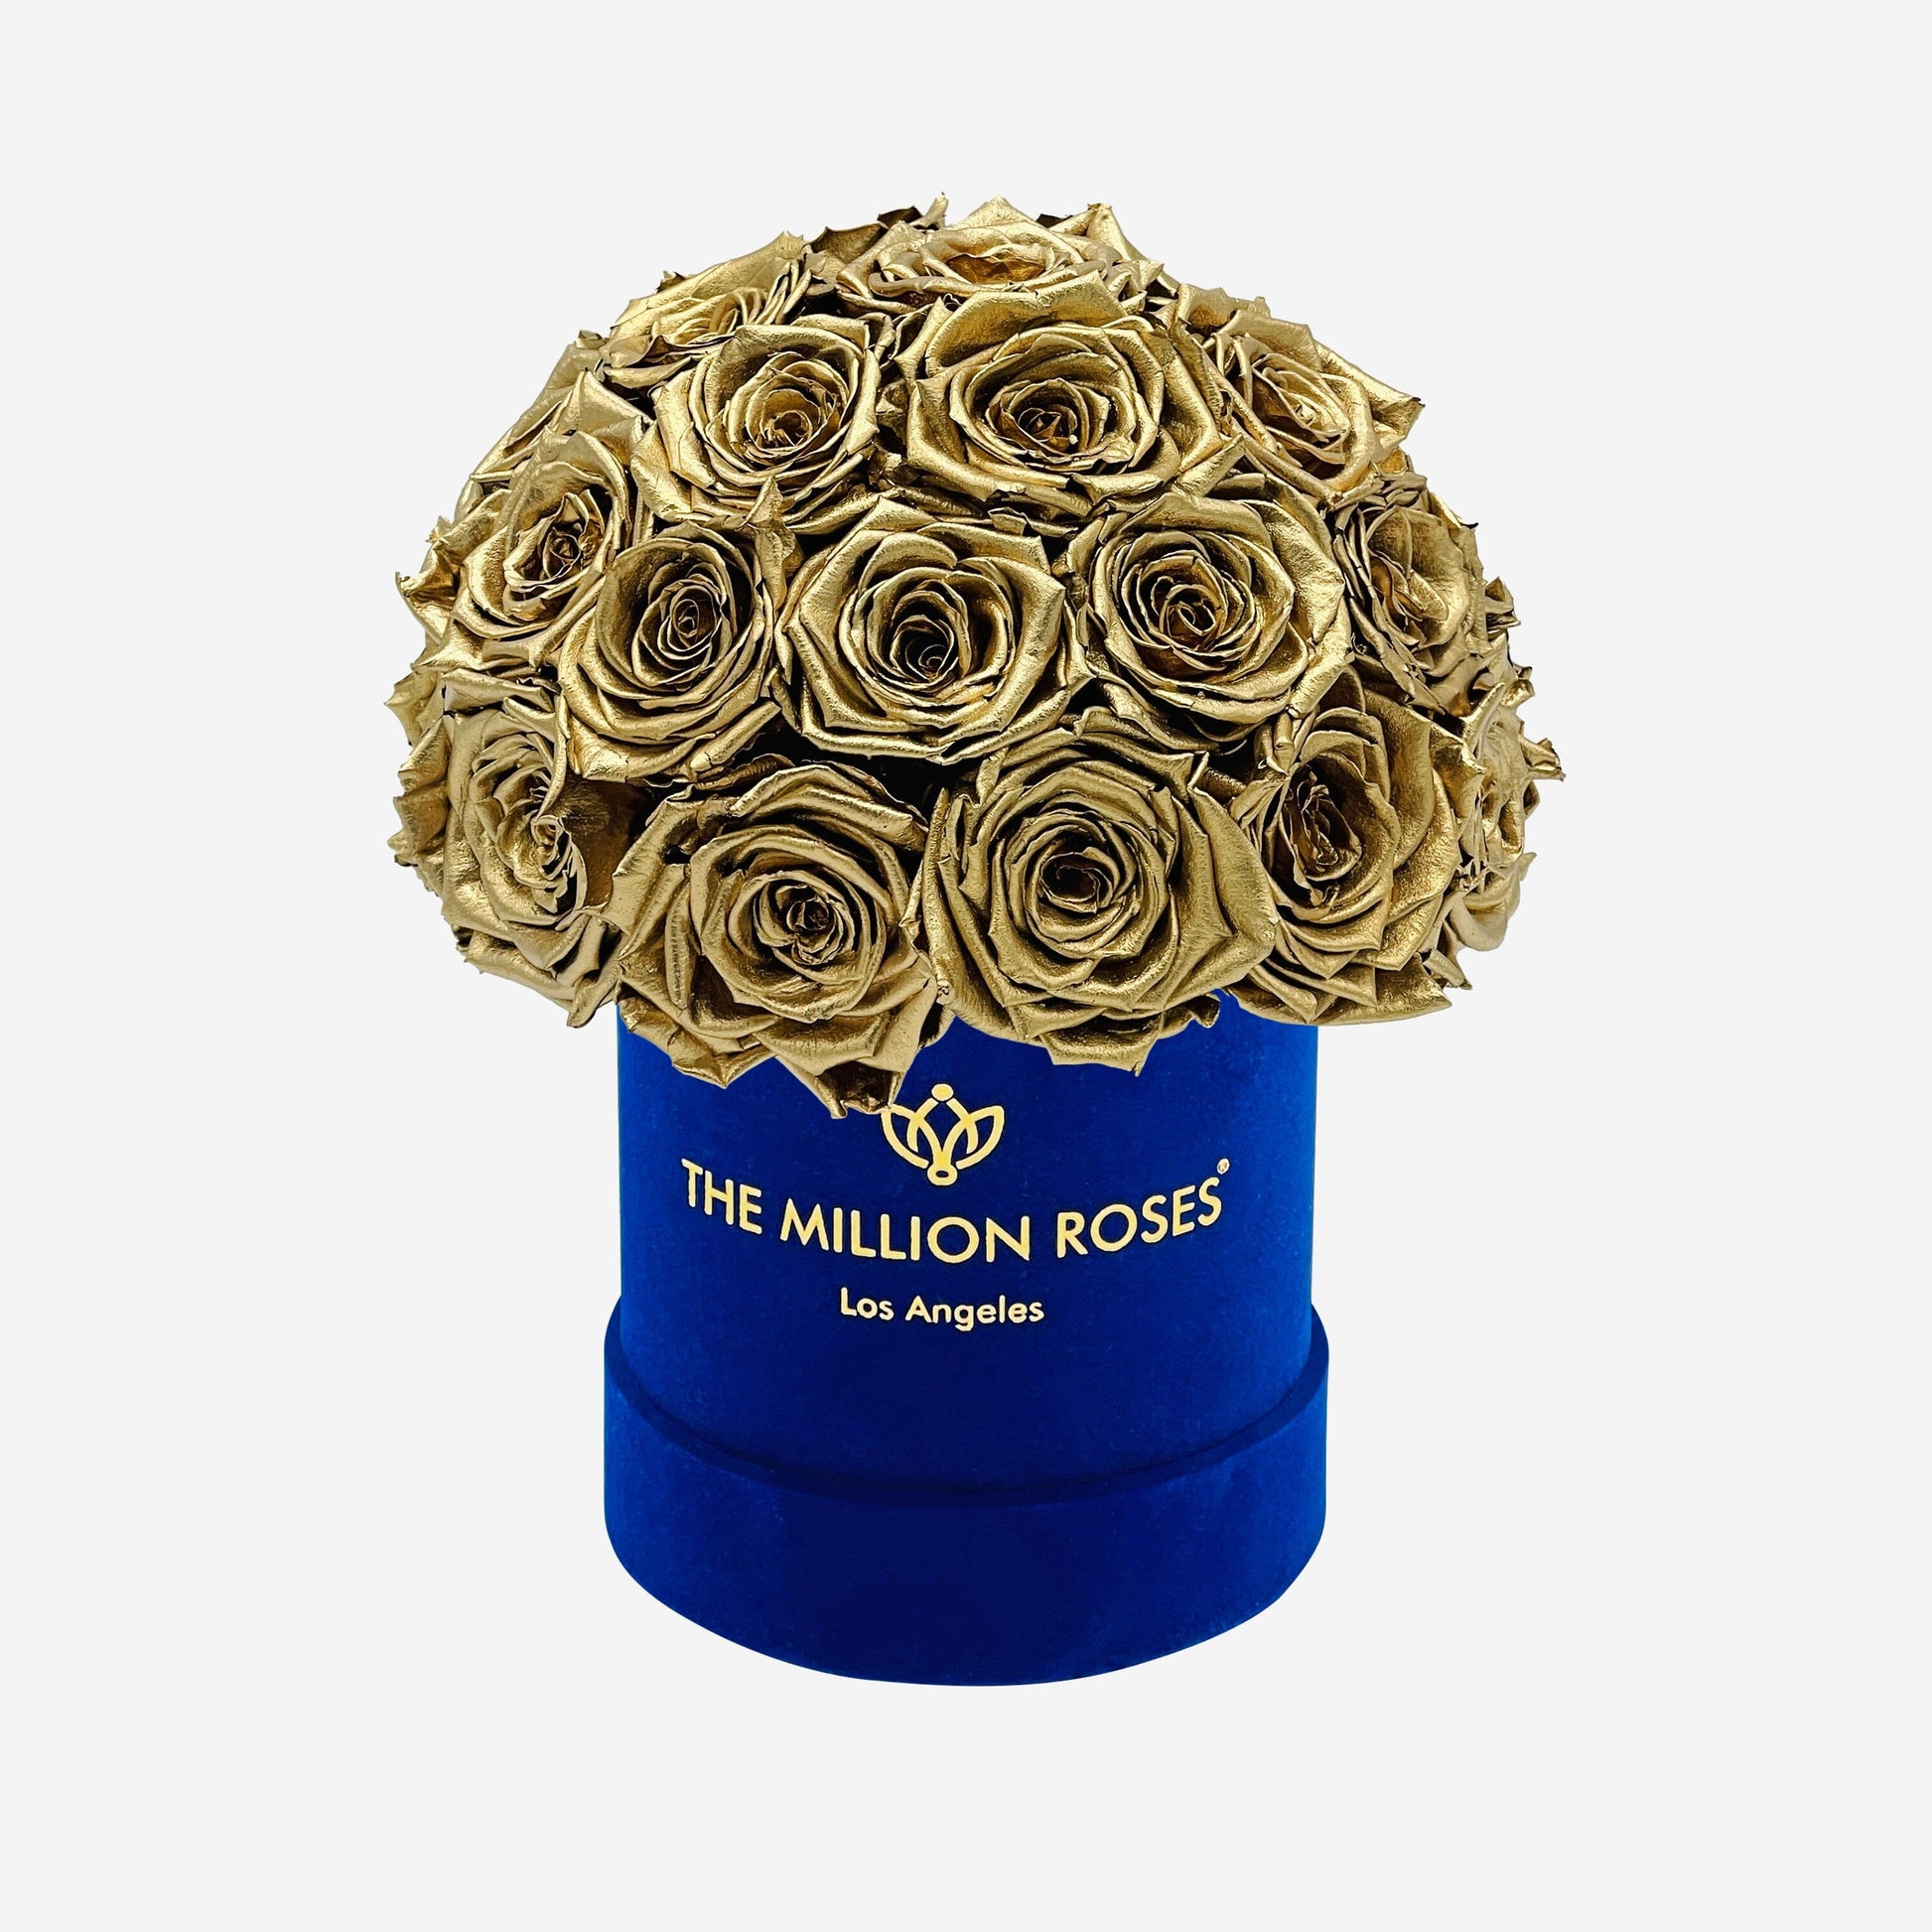 Basic Royal Blue Suede Superdome Box | Gold Roses - The Million Roses